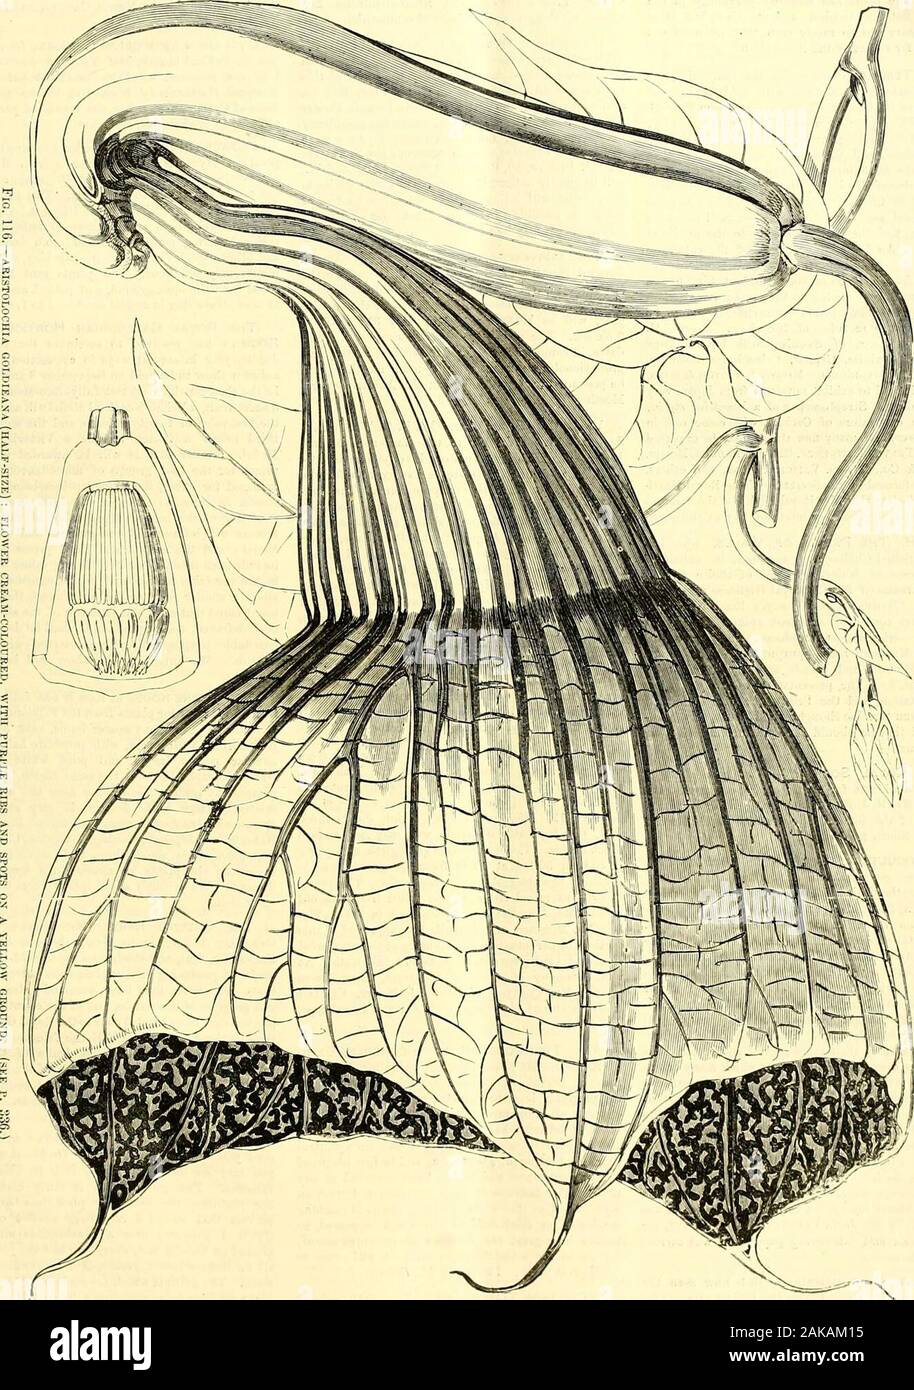 The Gardeners' chronicle : a weekly illustrated journal of horticulture and allied subjects . t the cost of a fewshillings. ARISTOLOCHIA GOLDIEANA.—One of the mostextraordinary flowers now in bloom ia the Victoria-house, Kew, is this West African species. Our illustra-tion (fig. 116, p. 337) is about half the real size. Theflower is naturally pendulous, or nearly so, the lowerpart of the tube is irregularly cylindrical, cream-coloured, smooth, and bent upwards nearly at a rightangle into a funnel-shaped upper half. This part ofthe tube is marked with prominent purple ribs ;and expands into a b Stock Photo